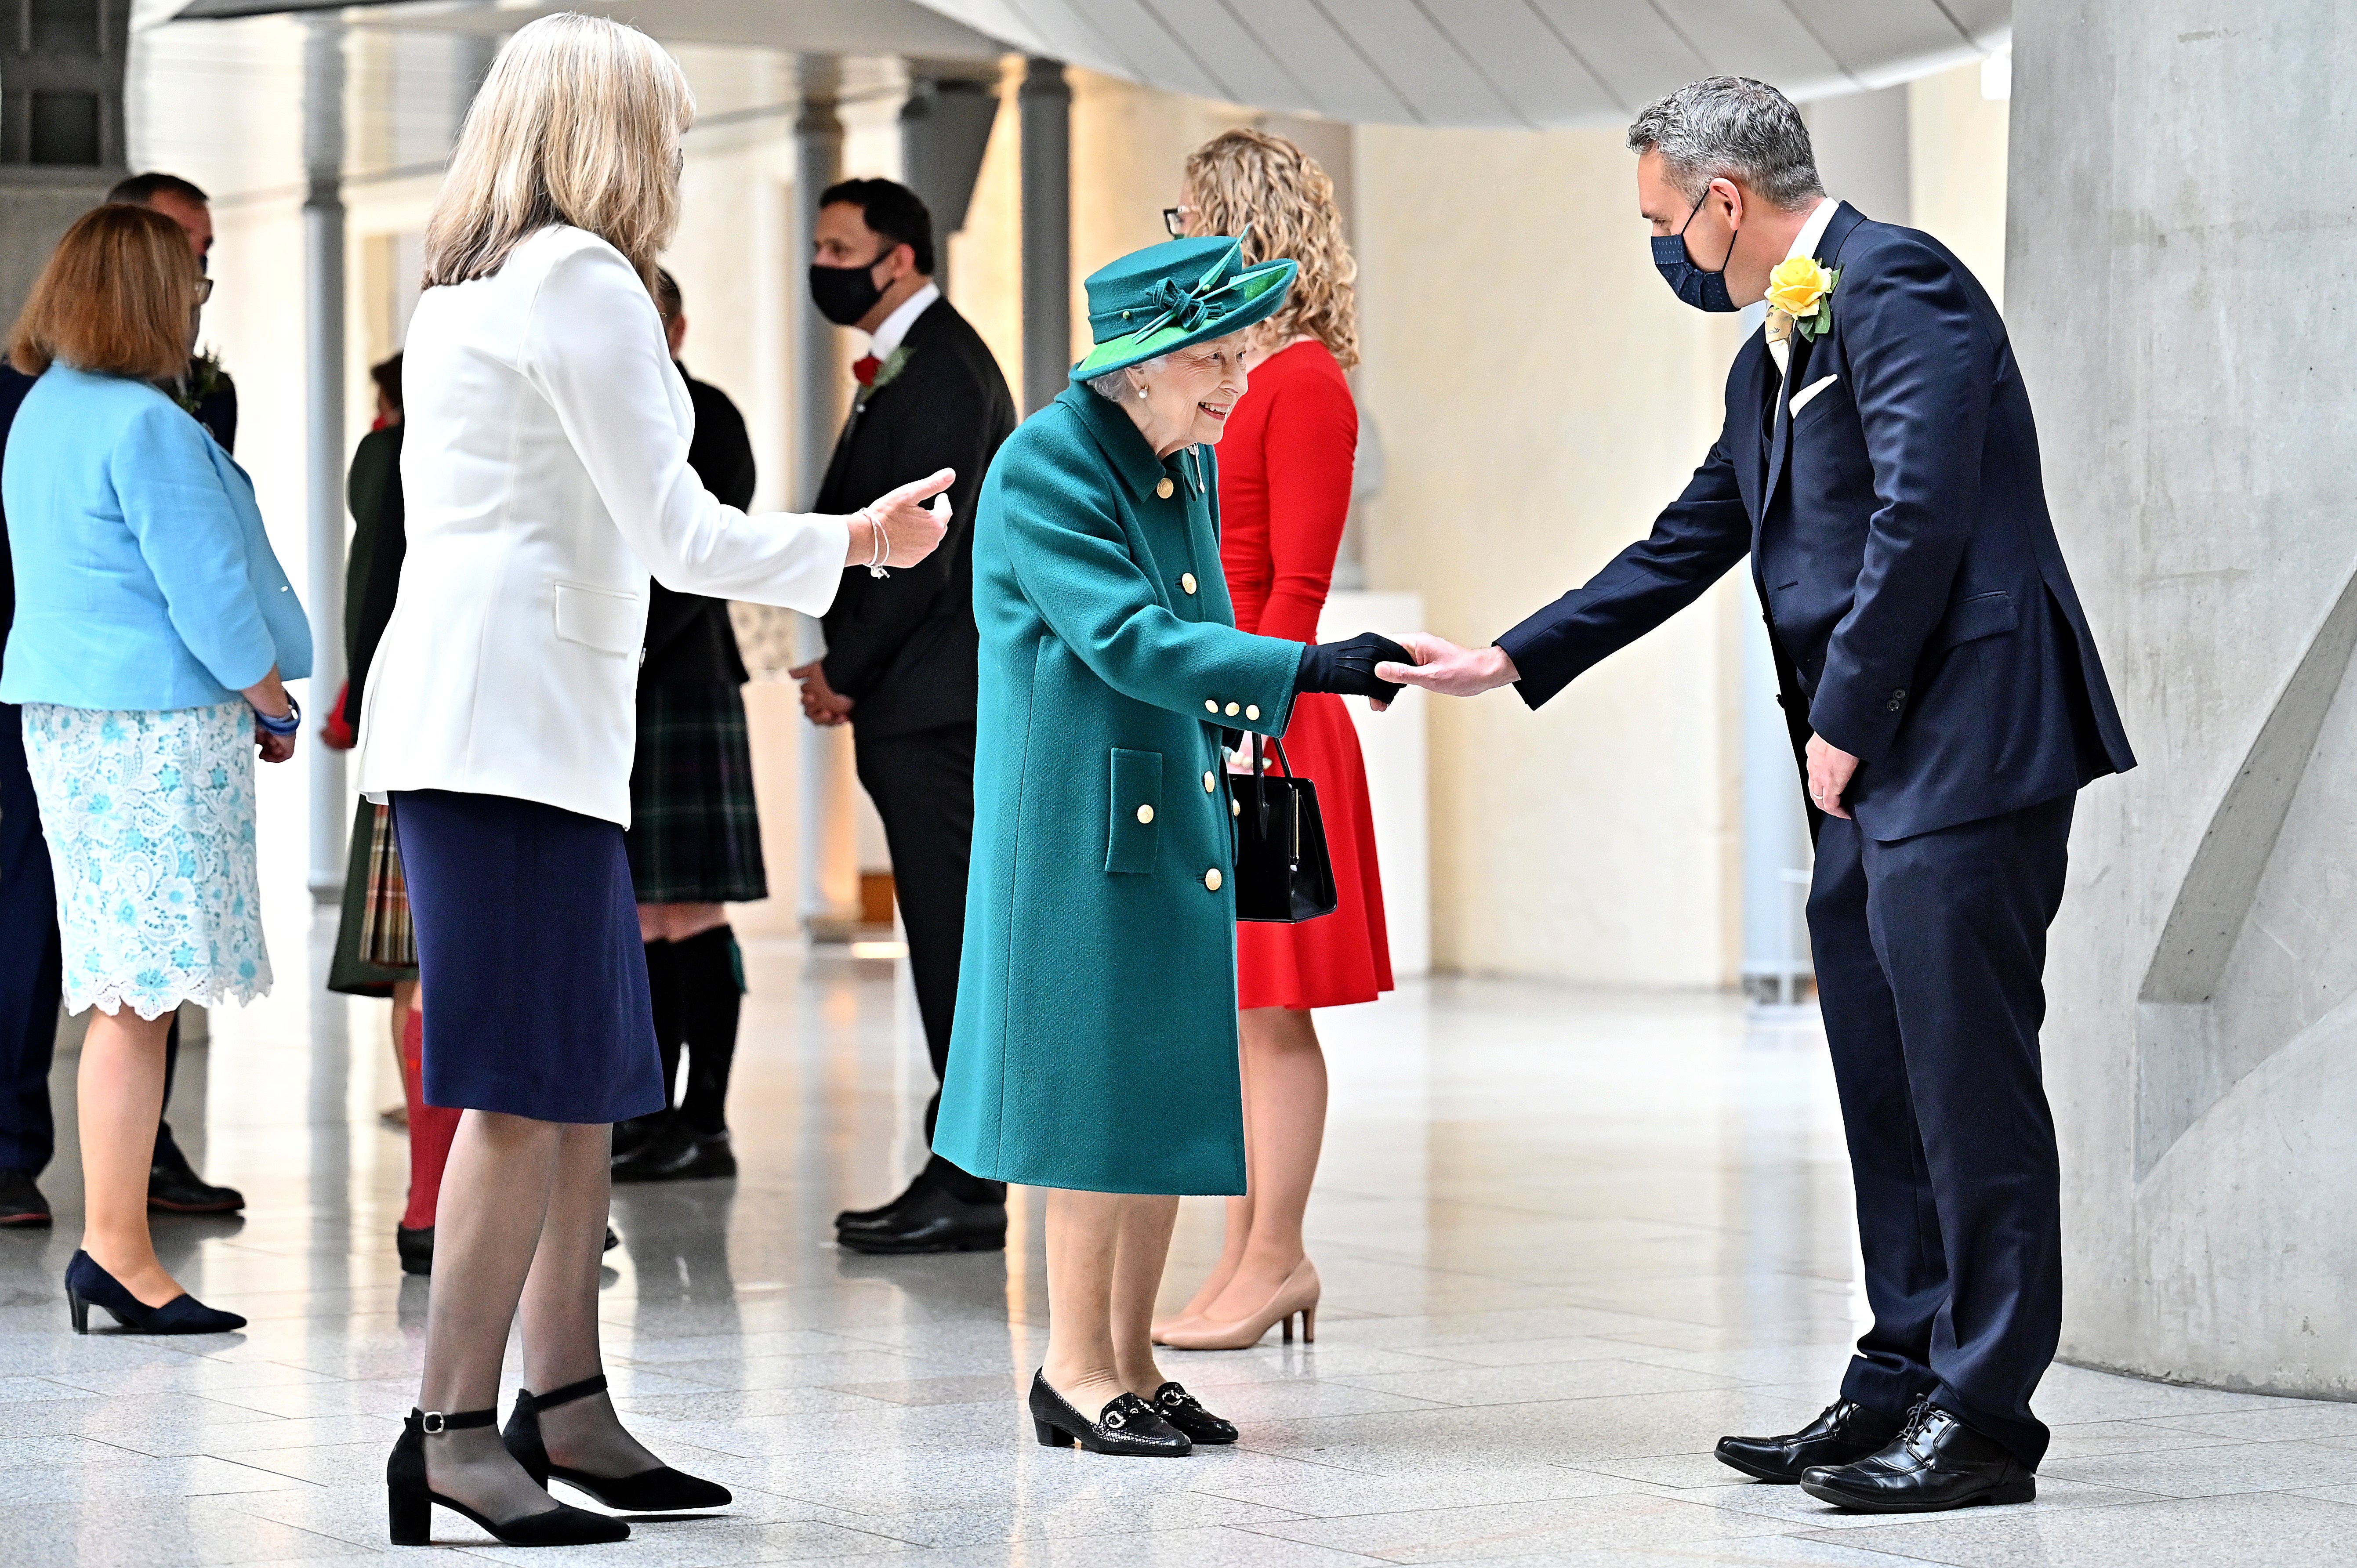 The Queen met Alex Cole-Hamilton at the Scottish Parliament last year (PA)